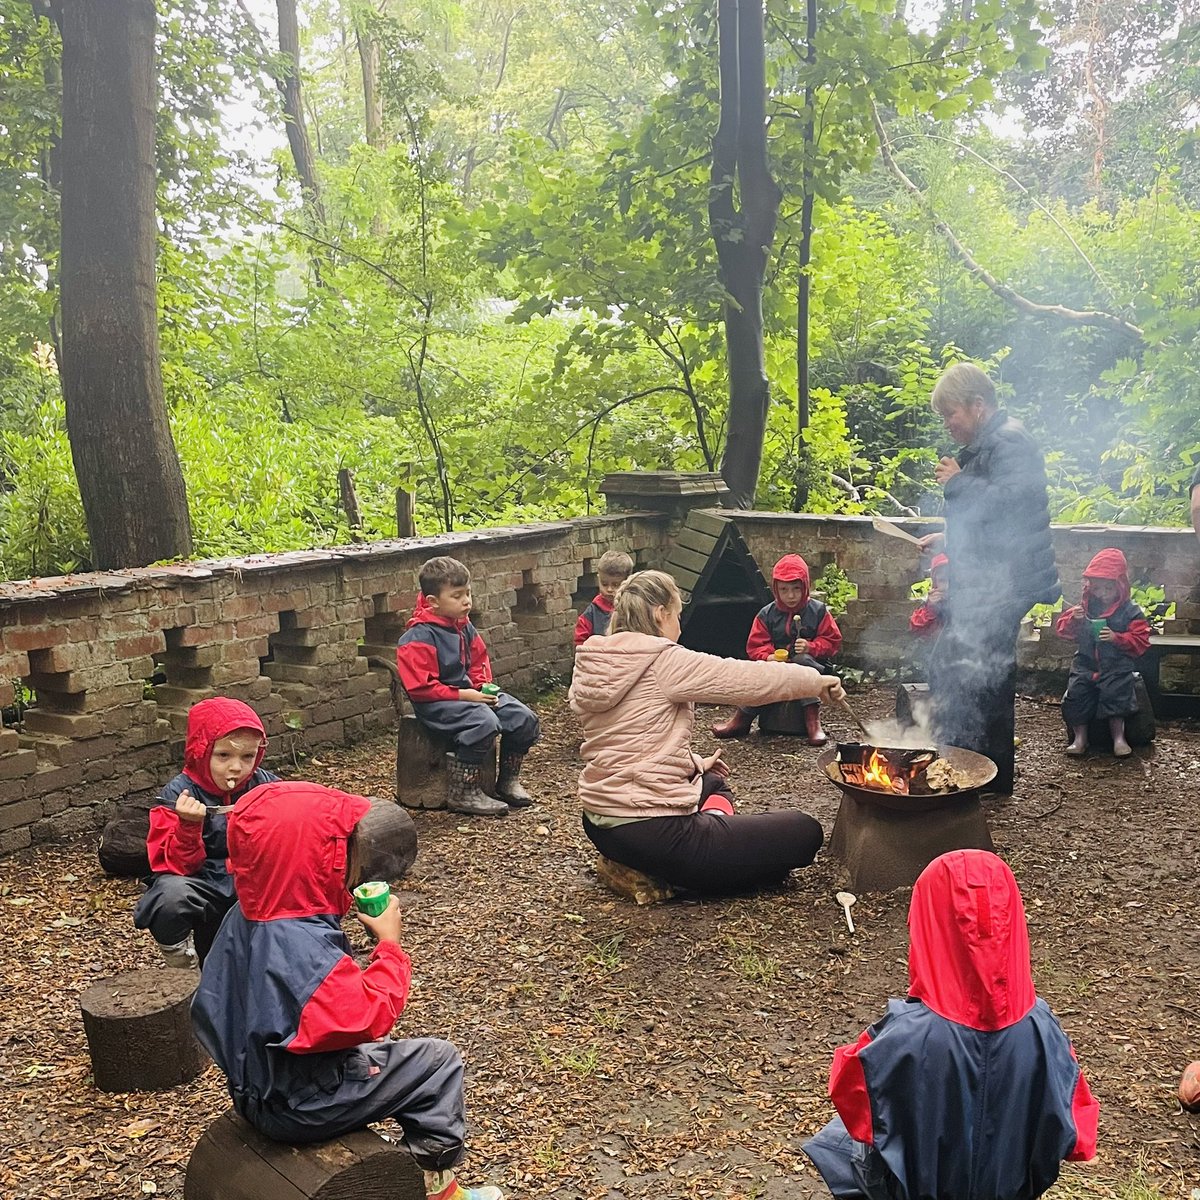 Mrs Pauline joined us for our visit to the Secret Garden and helped with our snack of macaroni cheese #outdoorlearning #outdoorclassroom #learningforlife #eaglehouseearlyyears #nursery